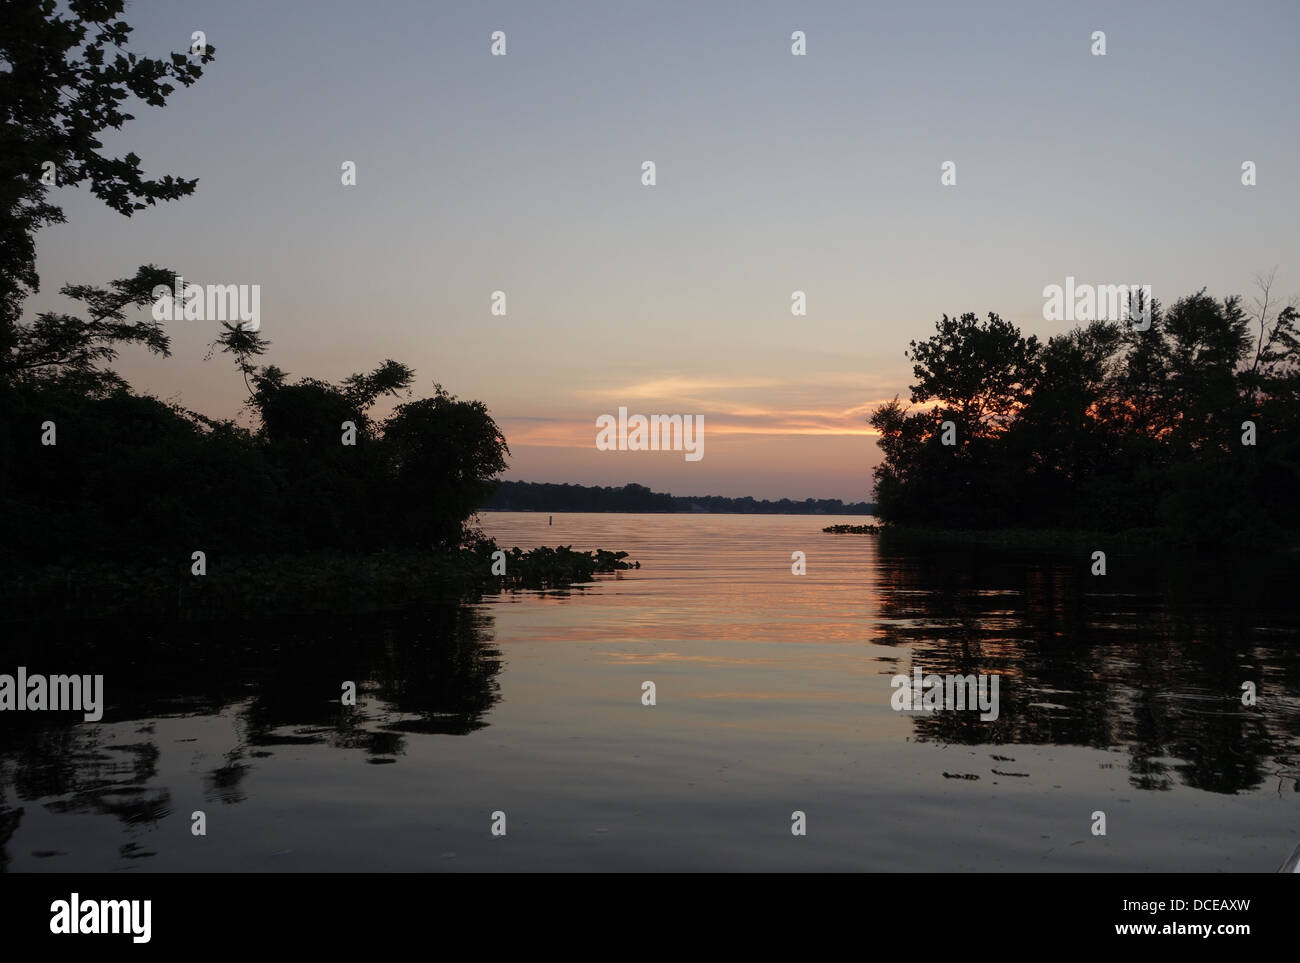 Summer evening on a lake in Indiana, USA. Stock Photo